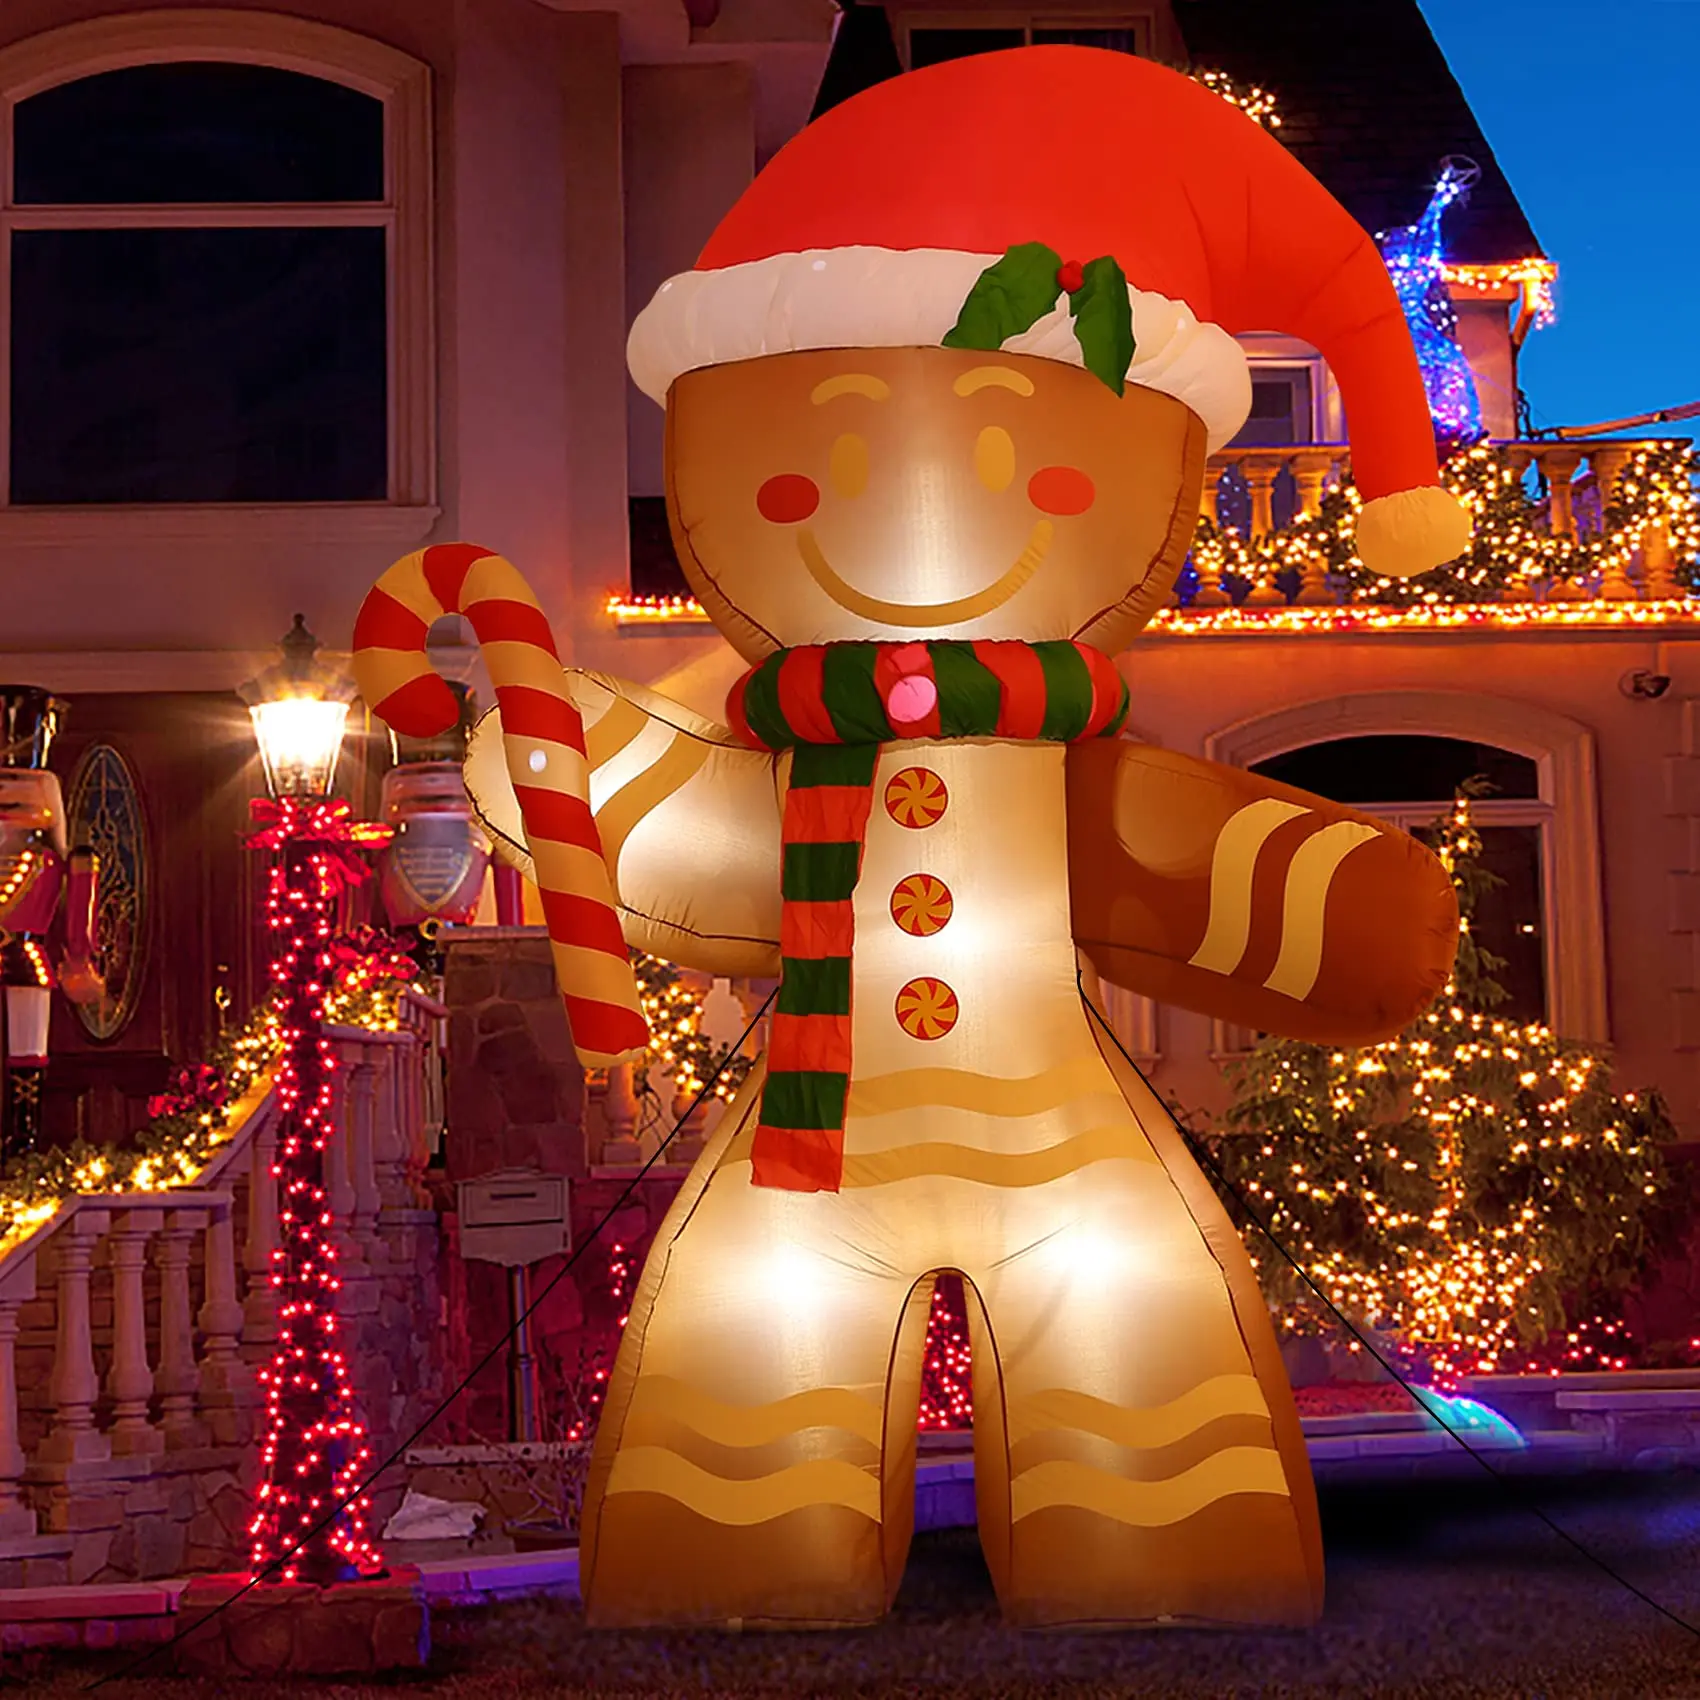 

8 FT Christmas Inflatables Decoration Gingerbread Man with Built-in LEDs Blow Up Inflatables for Xmas Party Indoor Outdoor Yard